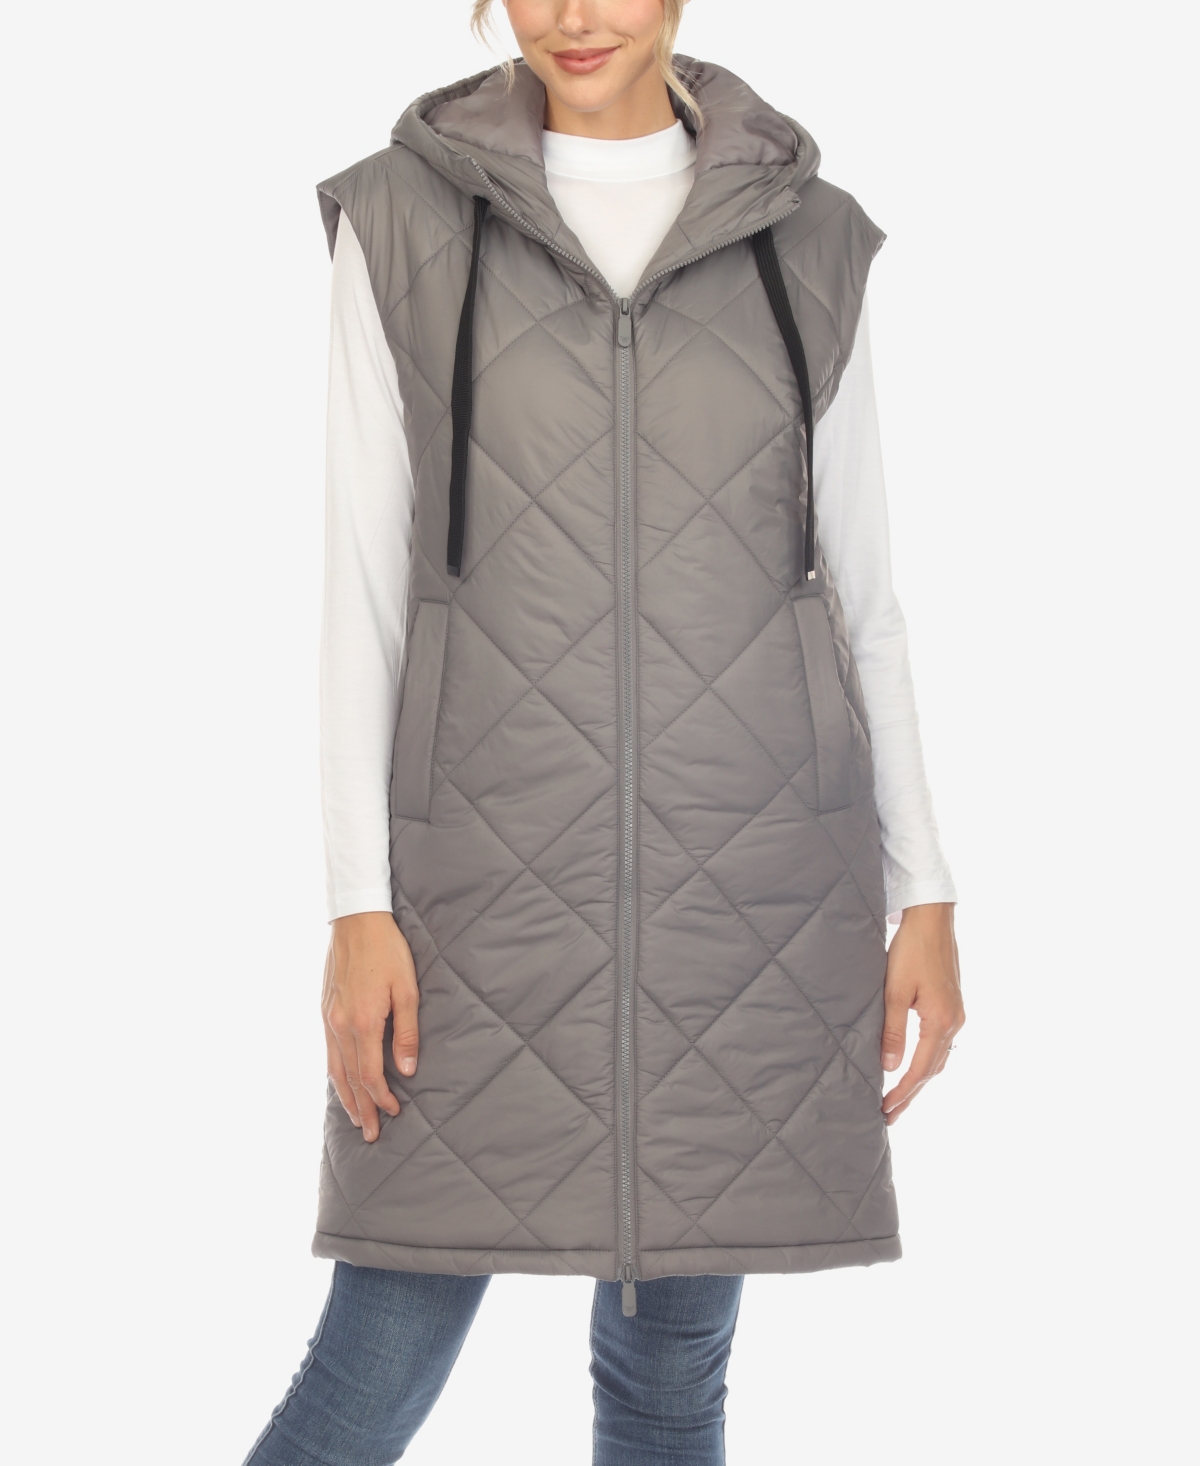 Women's Diamond Quilted Hooded Long Puffer Vest Jacket - Gray